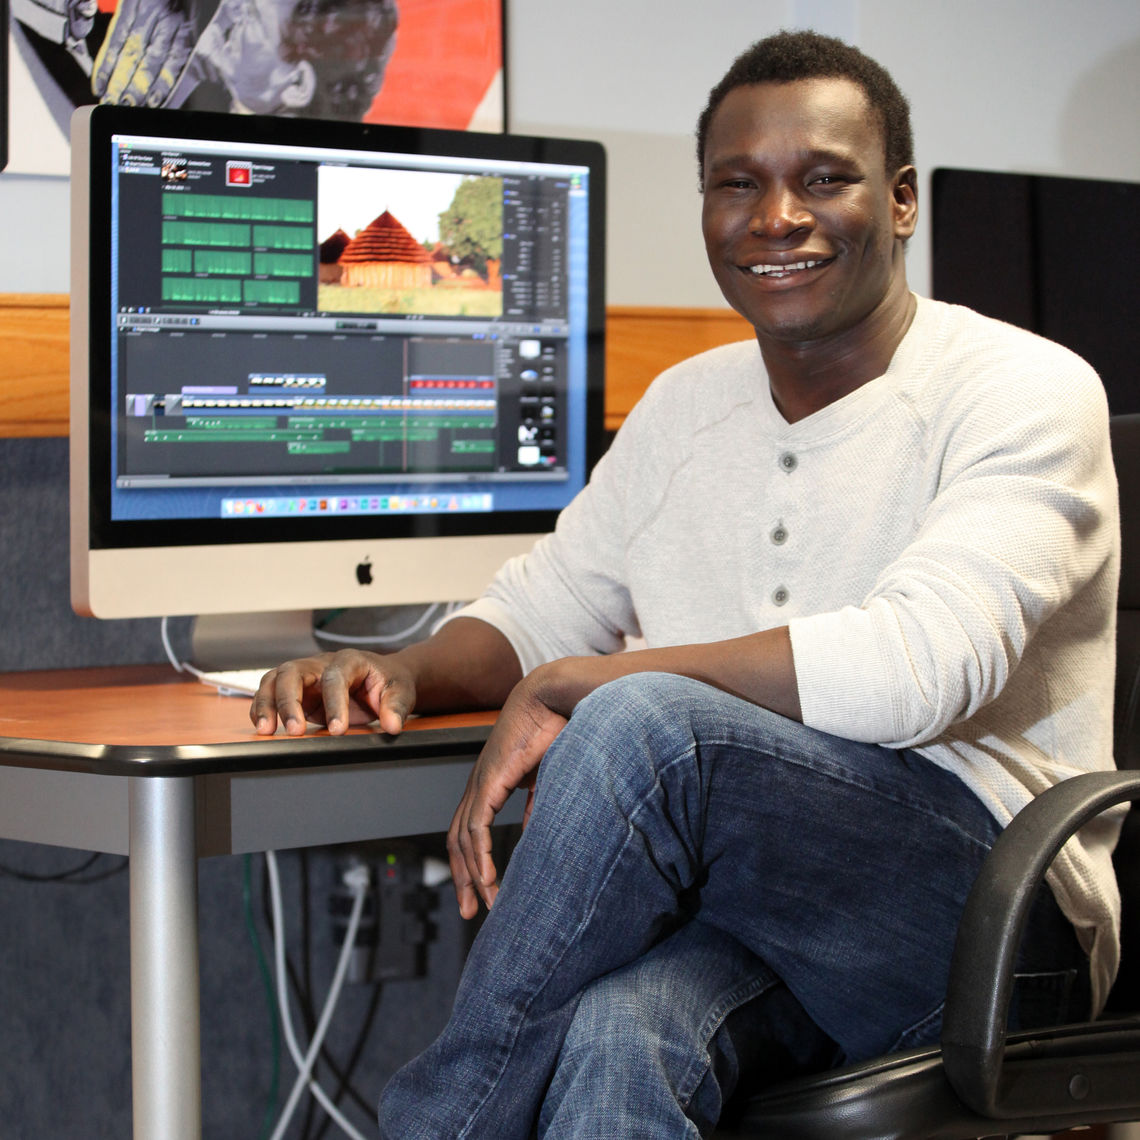 Dominic Akena is first looking to work in the film and media production field before going on to graduate school.